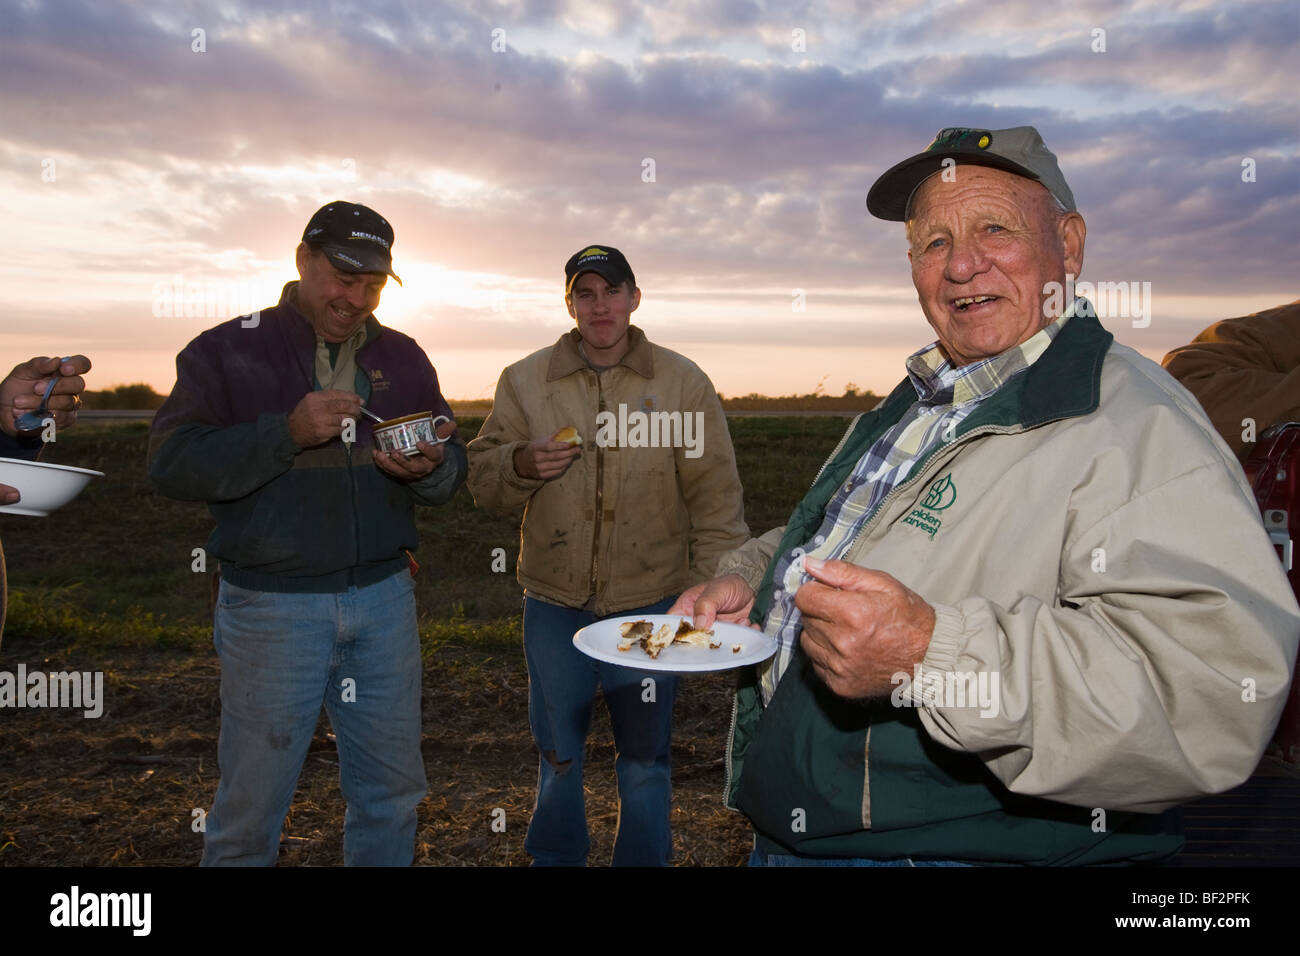 A farm family shares a meal together in the field during the long days of Autumn harvest / near Northland, Minnesota, USA. Stock Photo